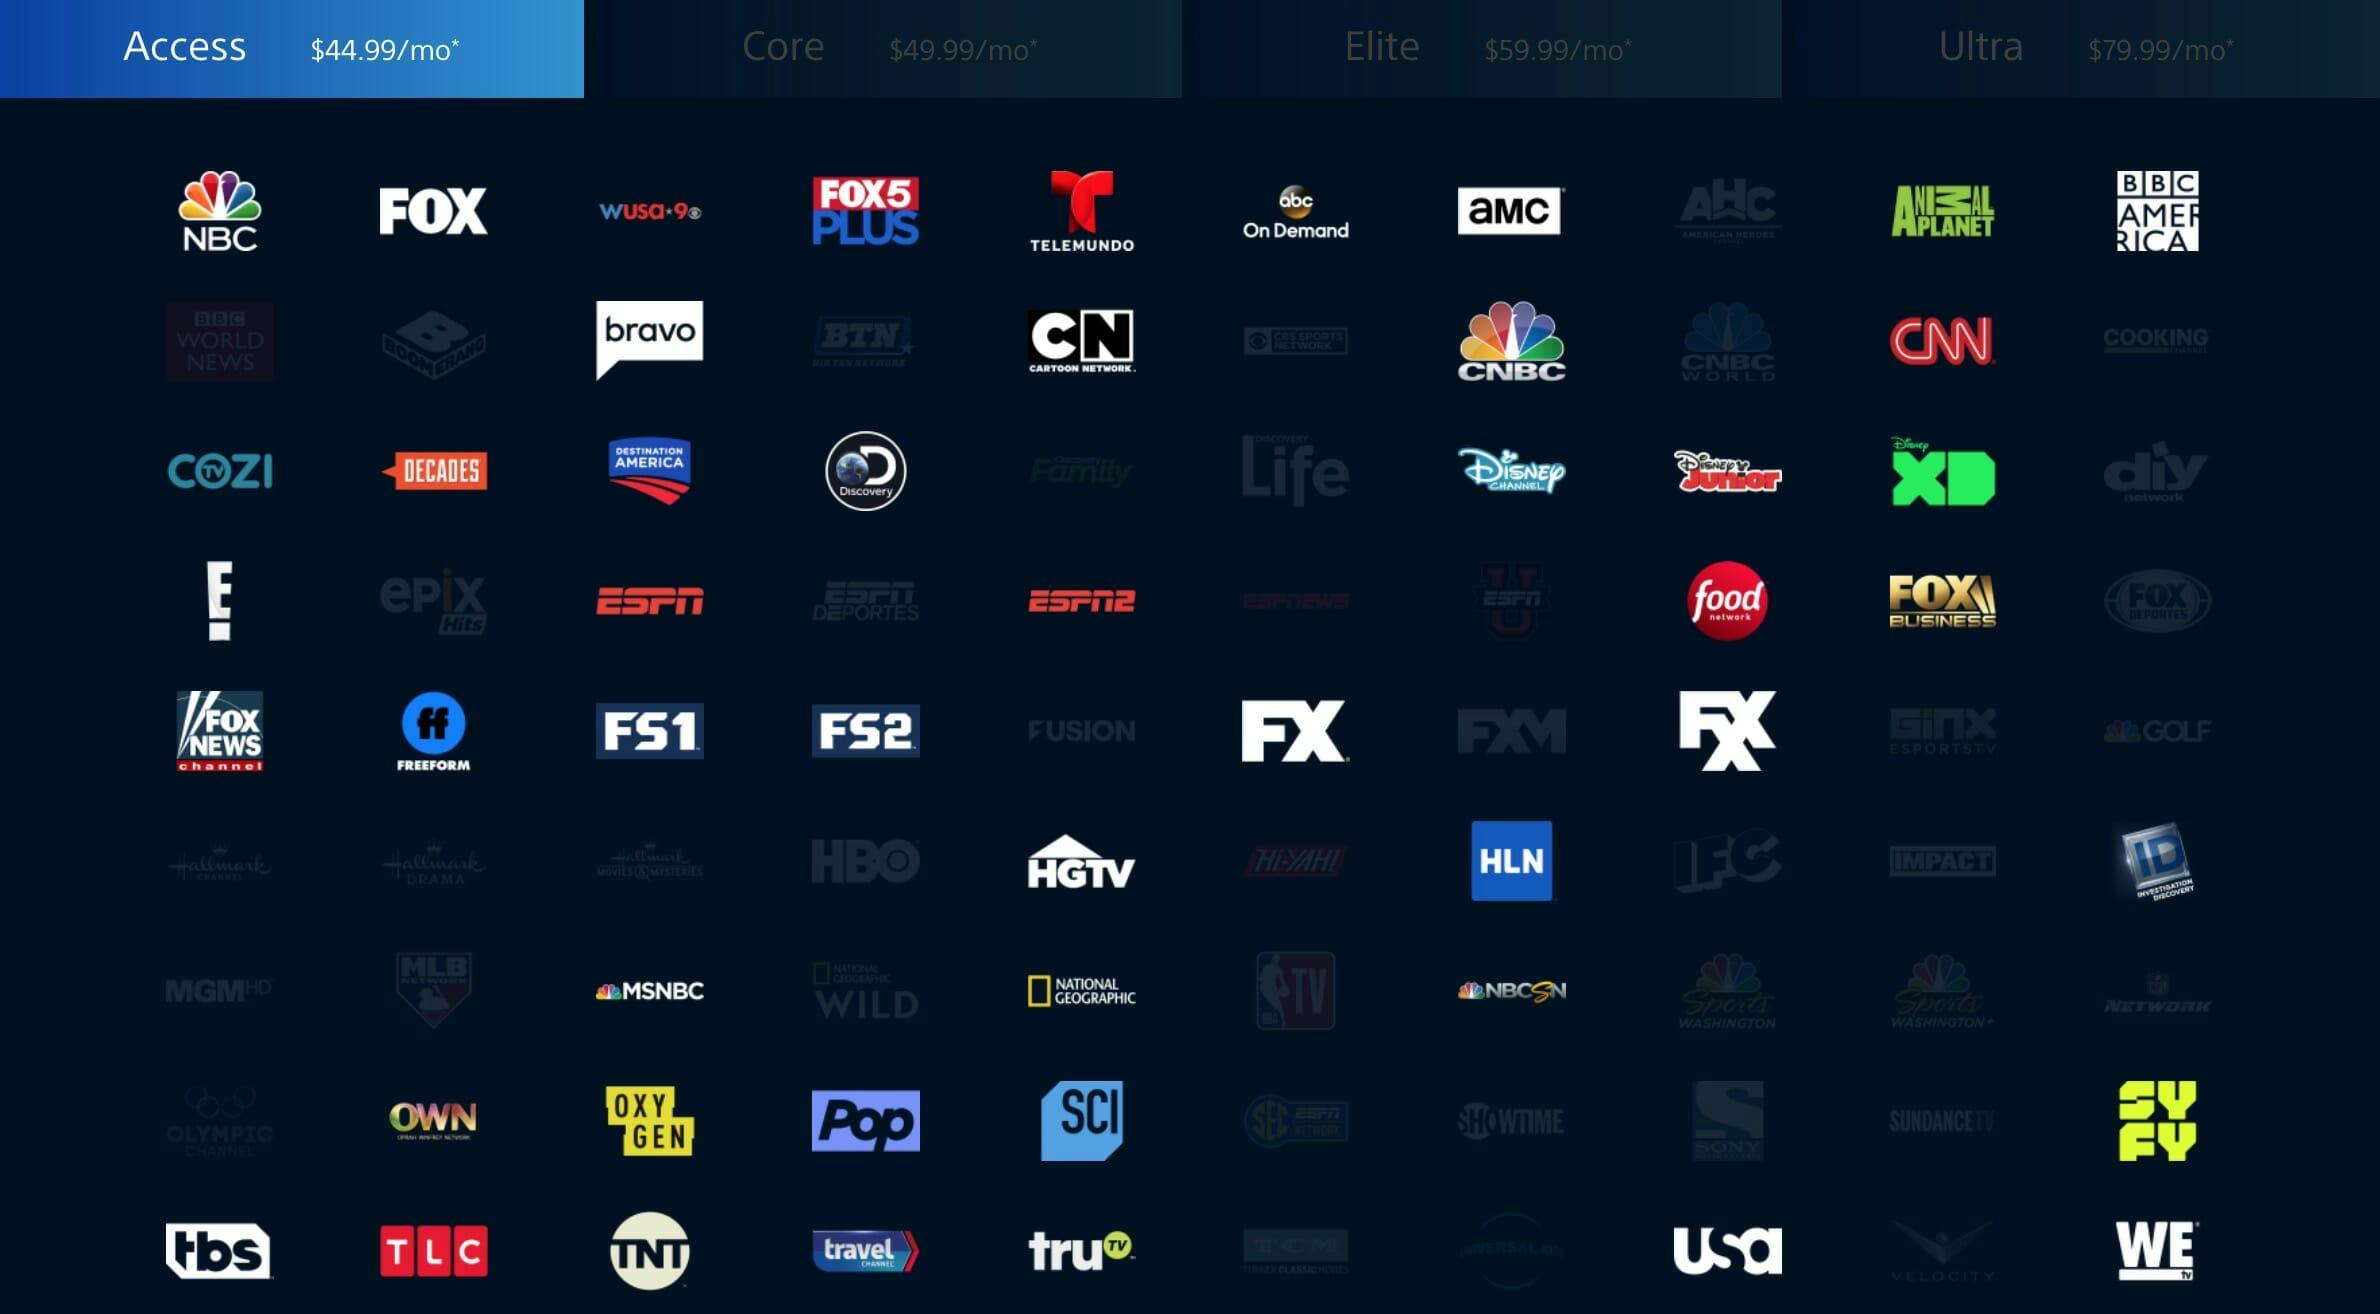 playstation vue channels - access package